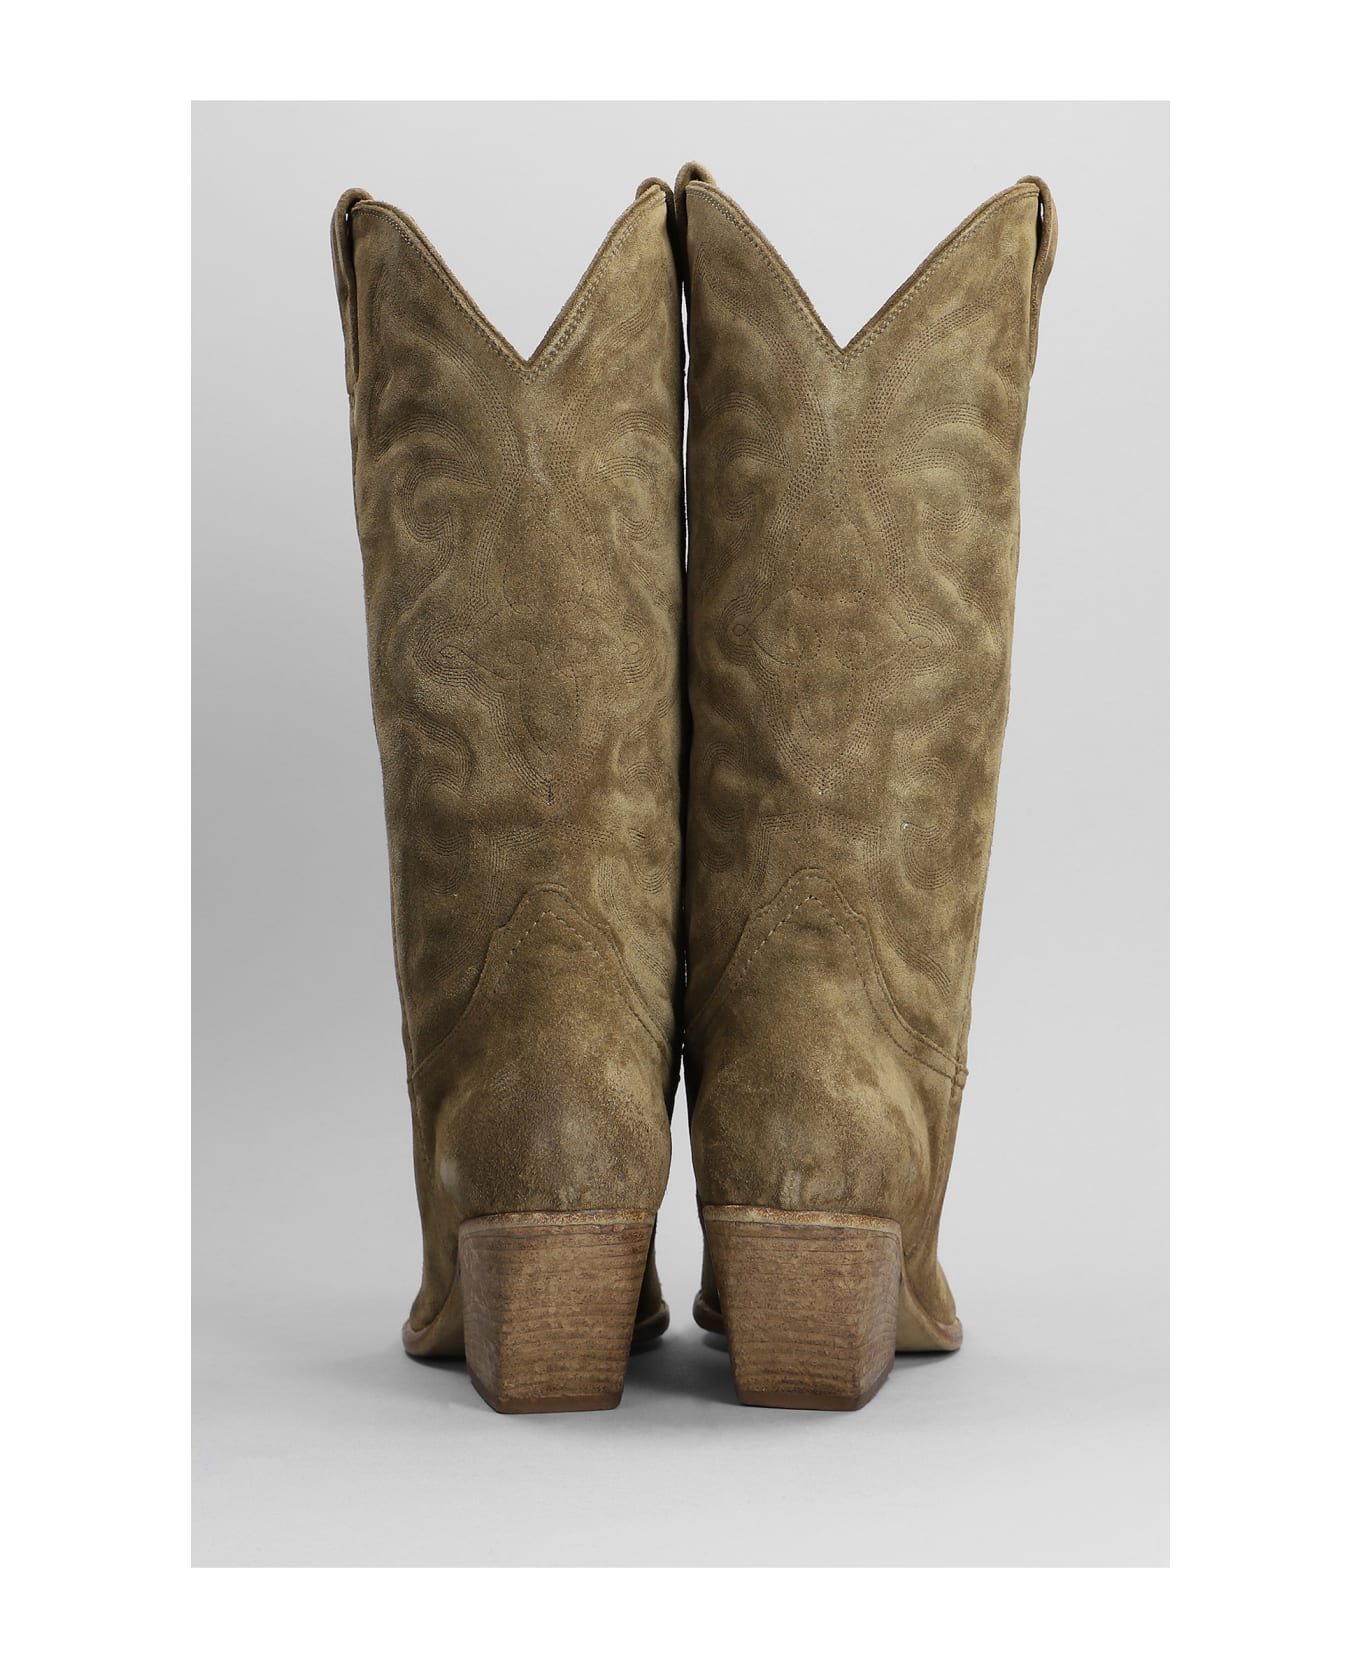 Elena Iachi Texan Boots In Taupe Suede - taupe